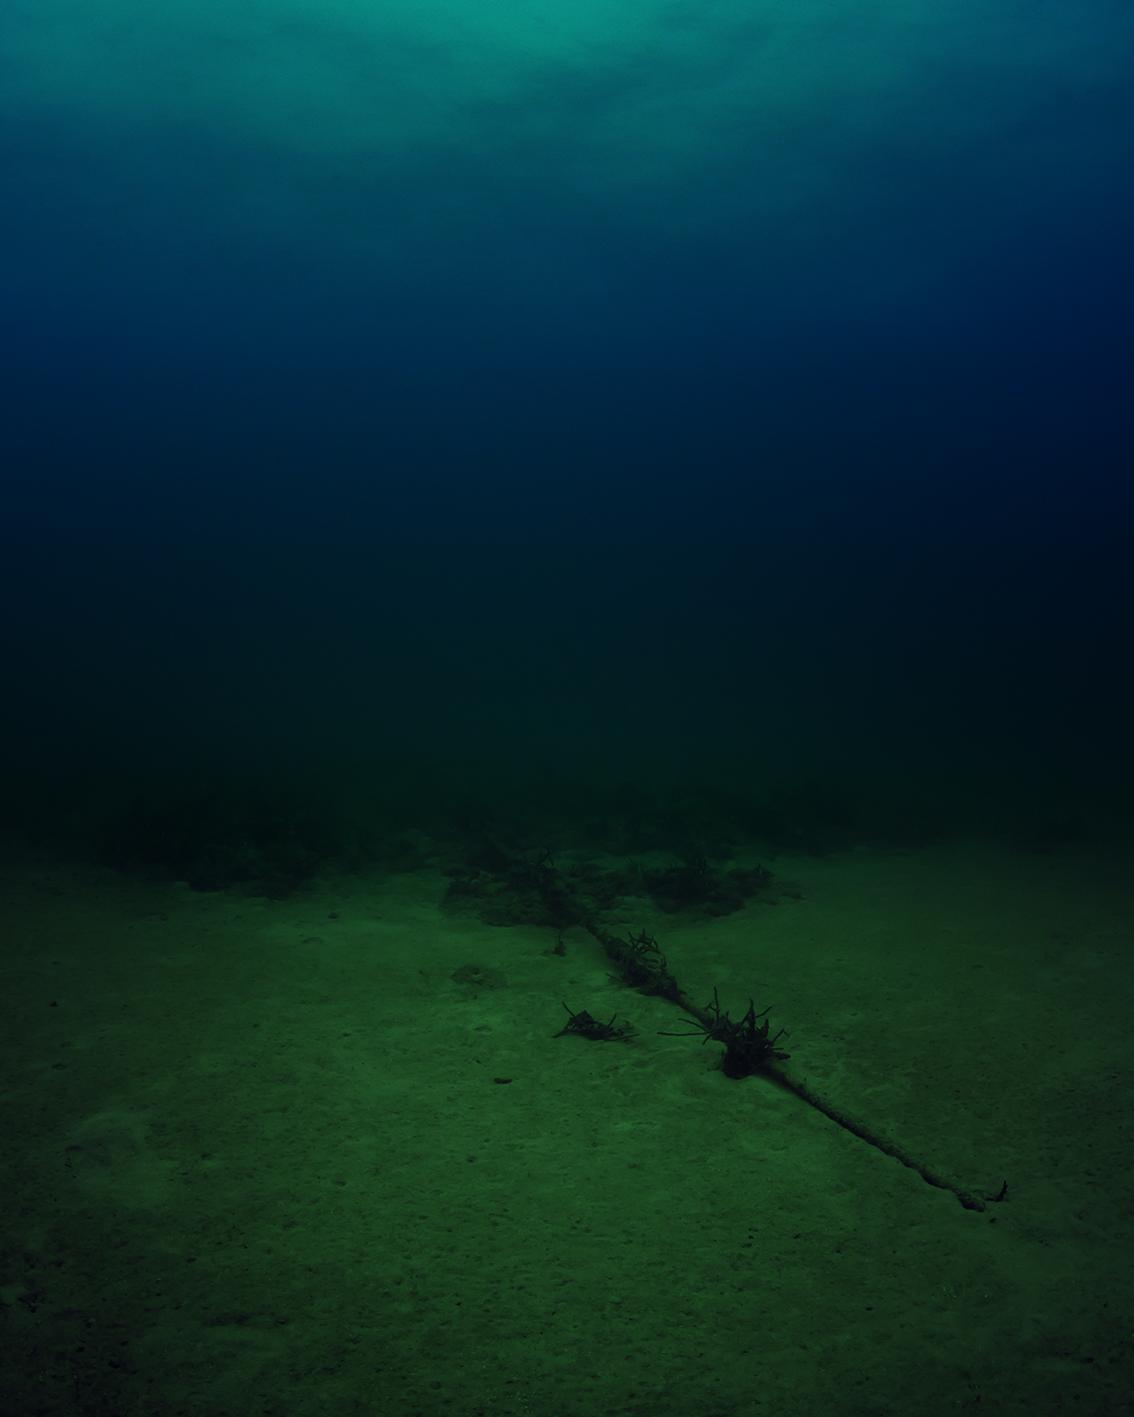 A photograph of the bottom of the Atlantic Ocean with a cable wrapped in algae.